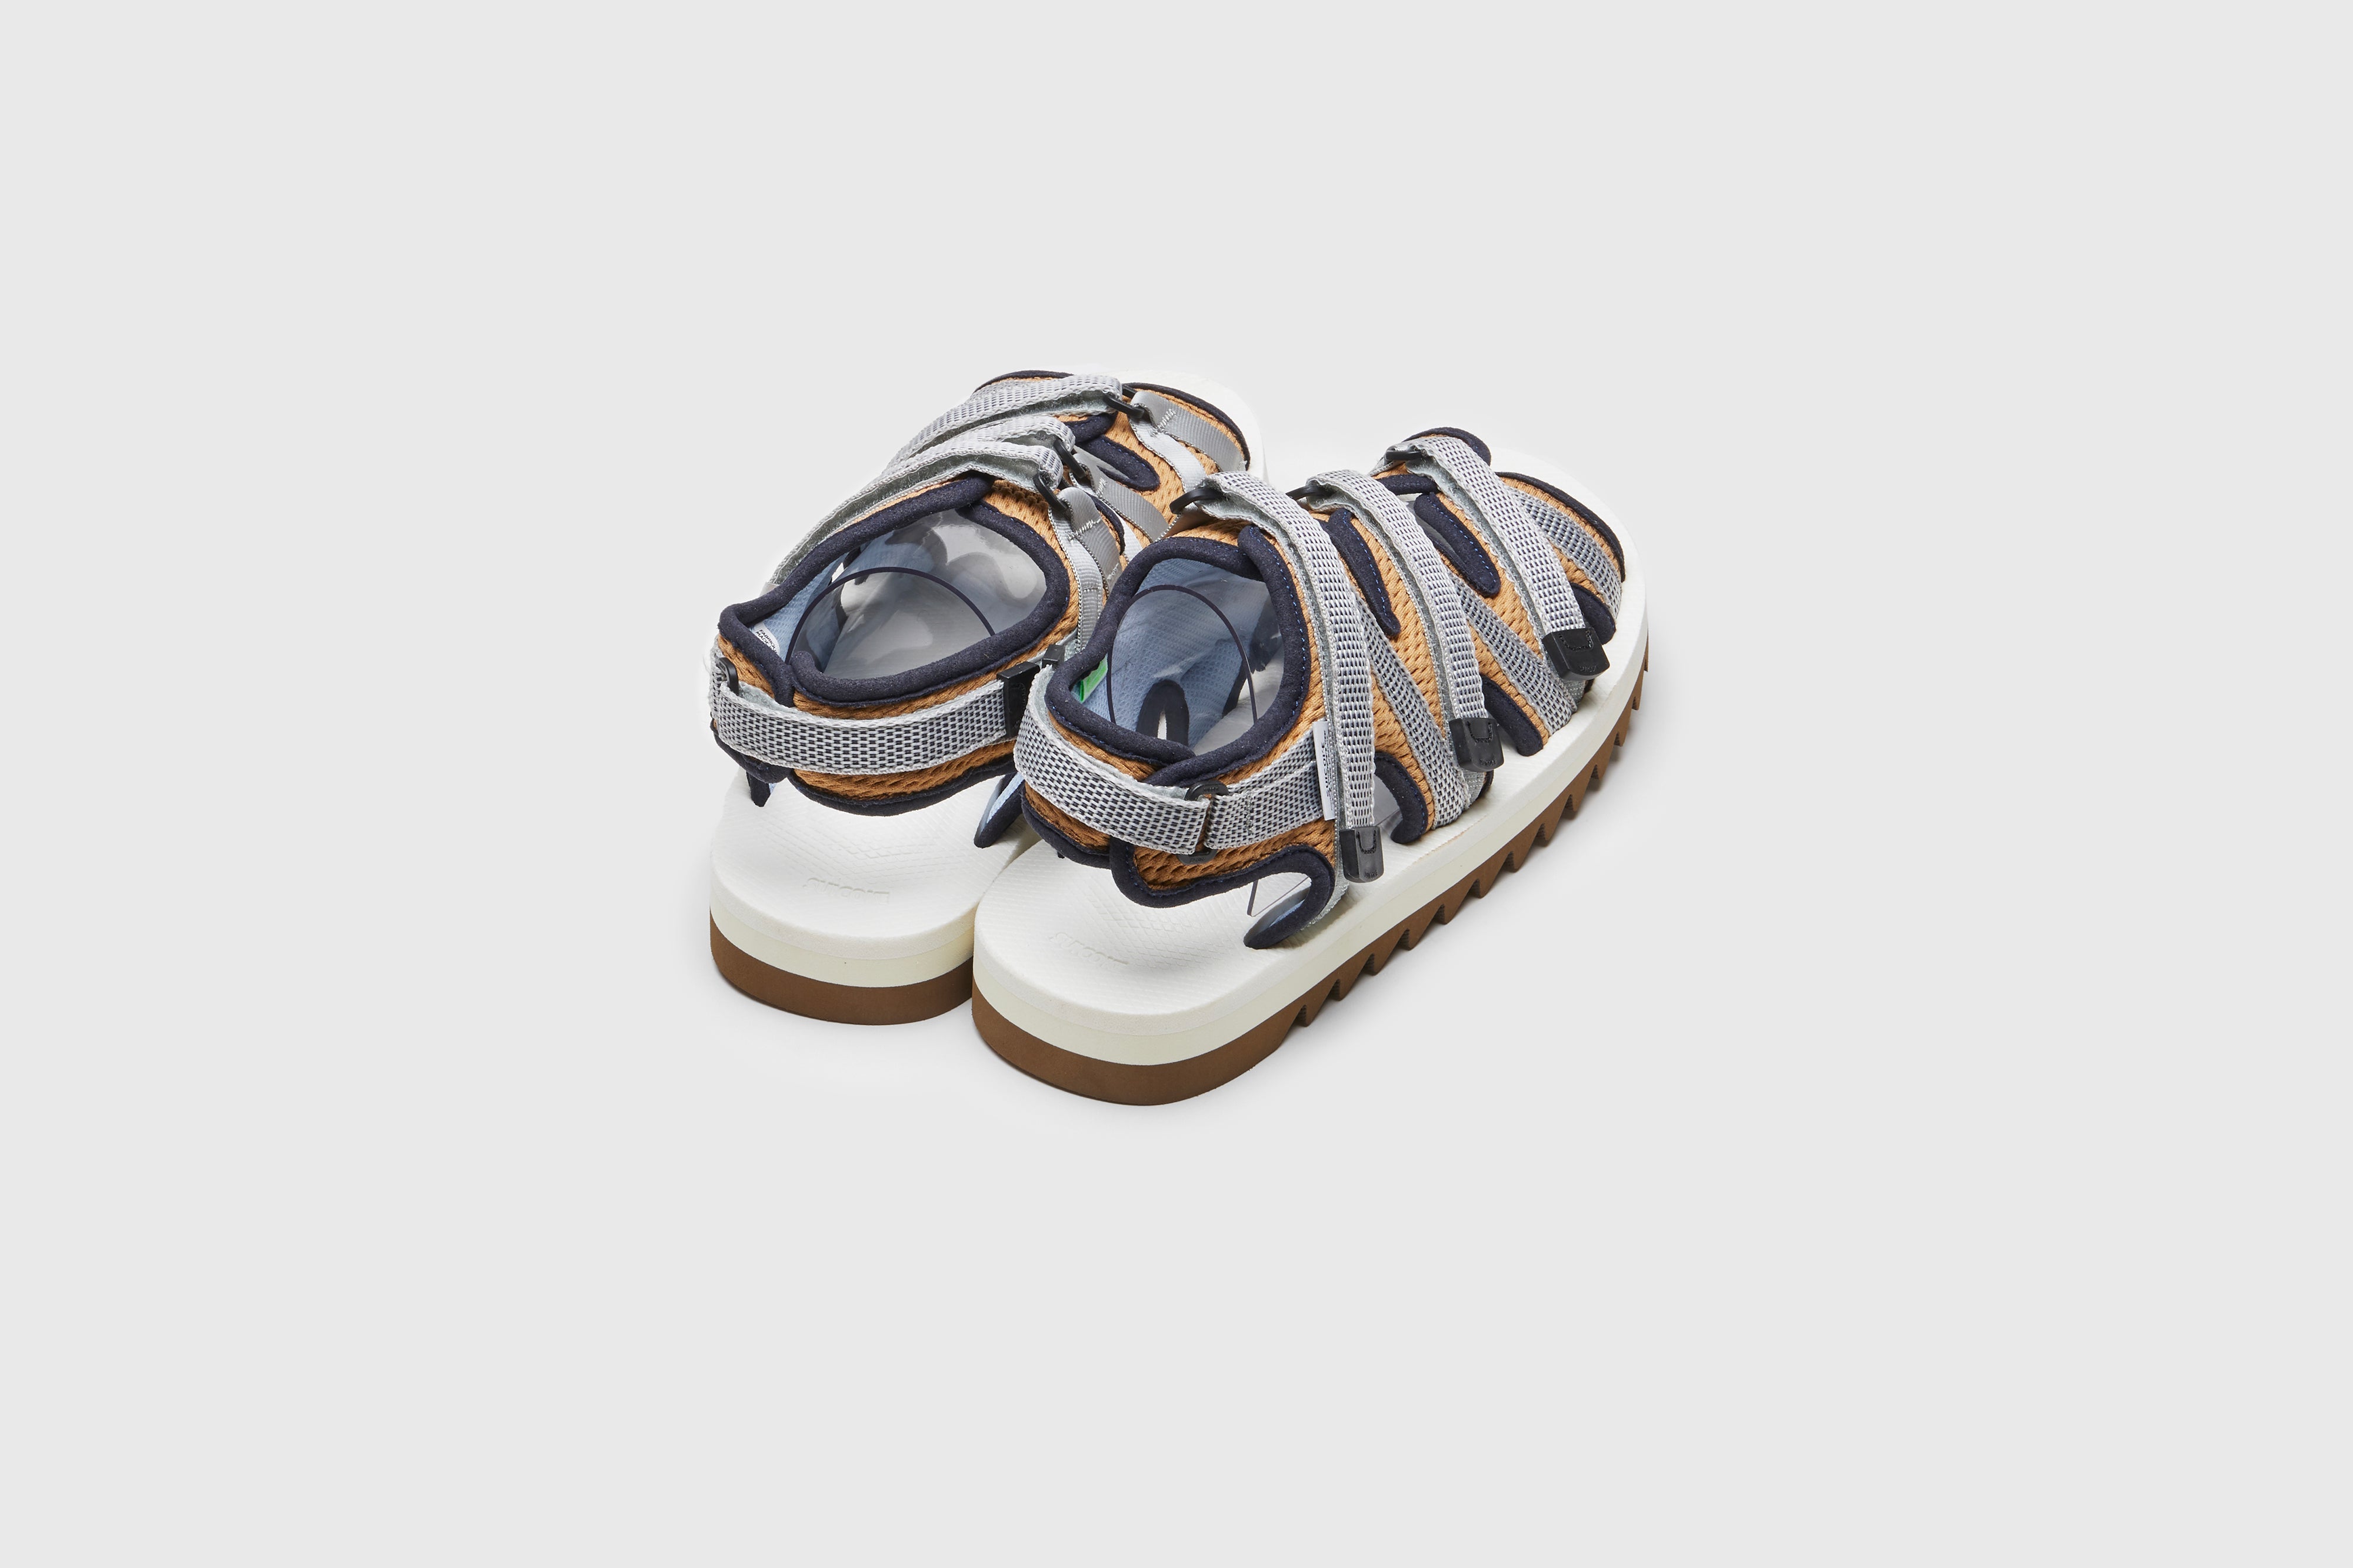 SUICOKE ZIP-ab sandals with navy & white nylon upper, navy & white midsole and sole, strap and logo patch. From Spring/Summer 2023 collection on eightywingold Web Store, an official partner of SUICOKE. OG-229AB NAVY X WHITE